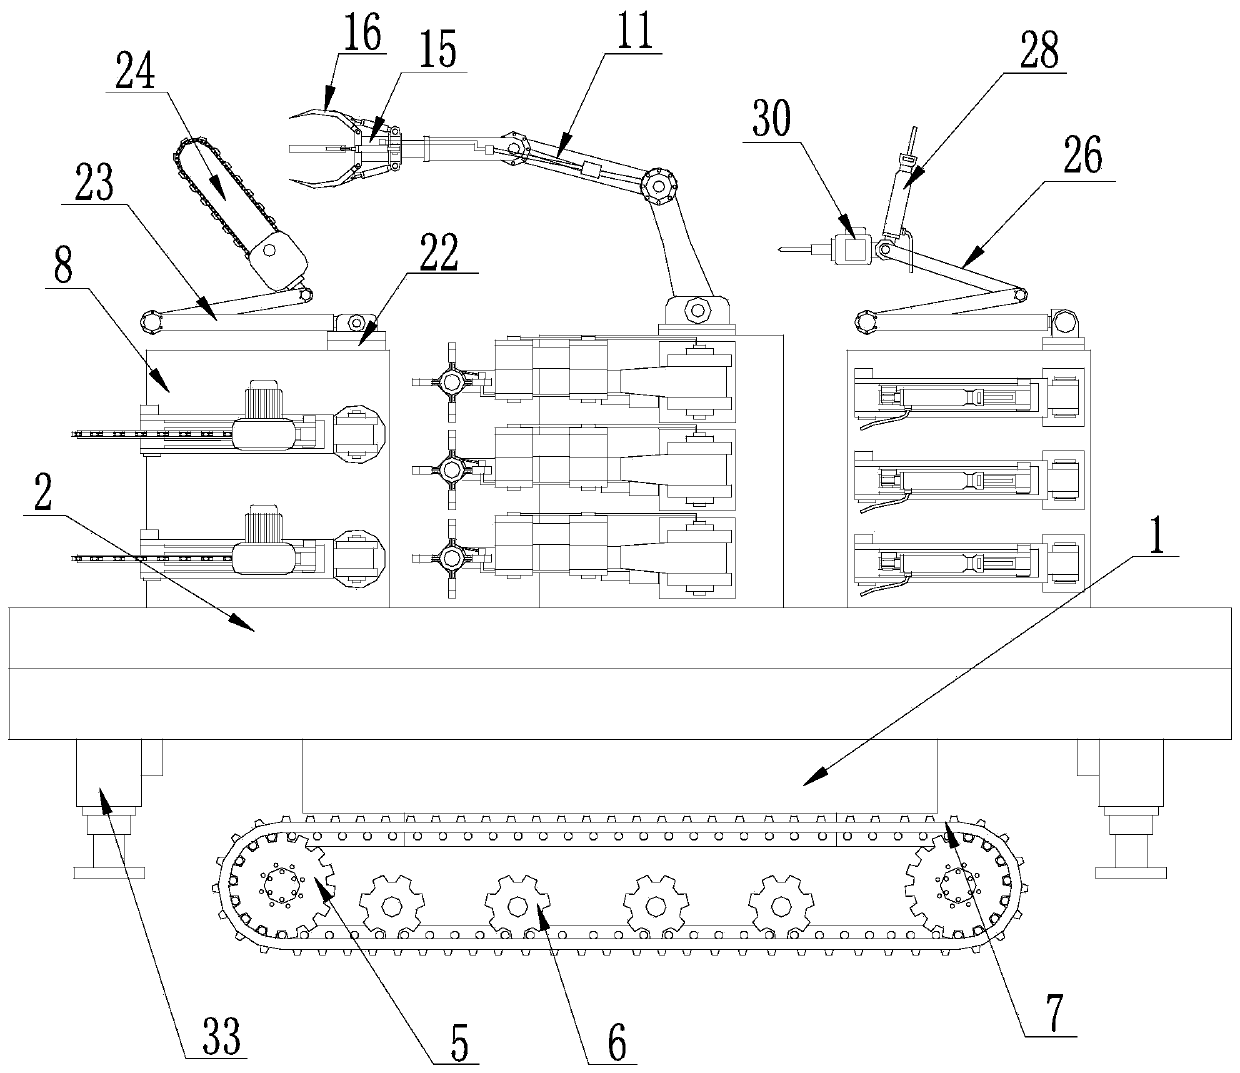 Self-propelled tunnel lining dismantling equipment and using method